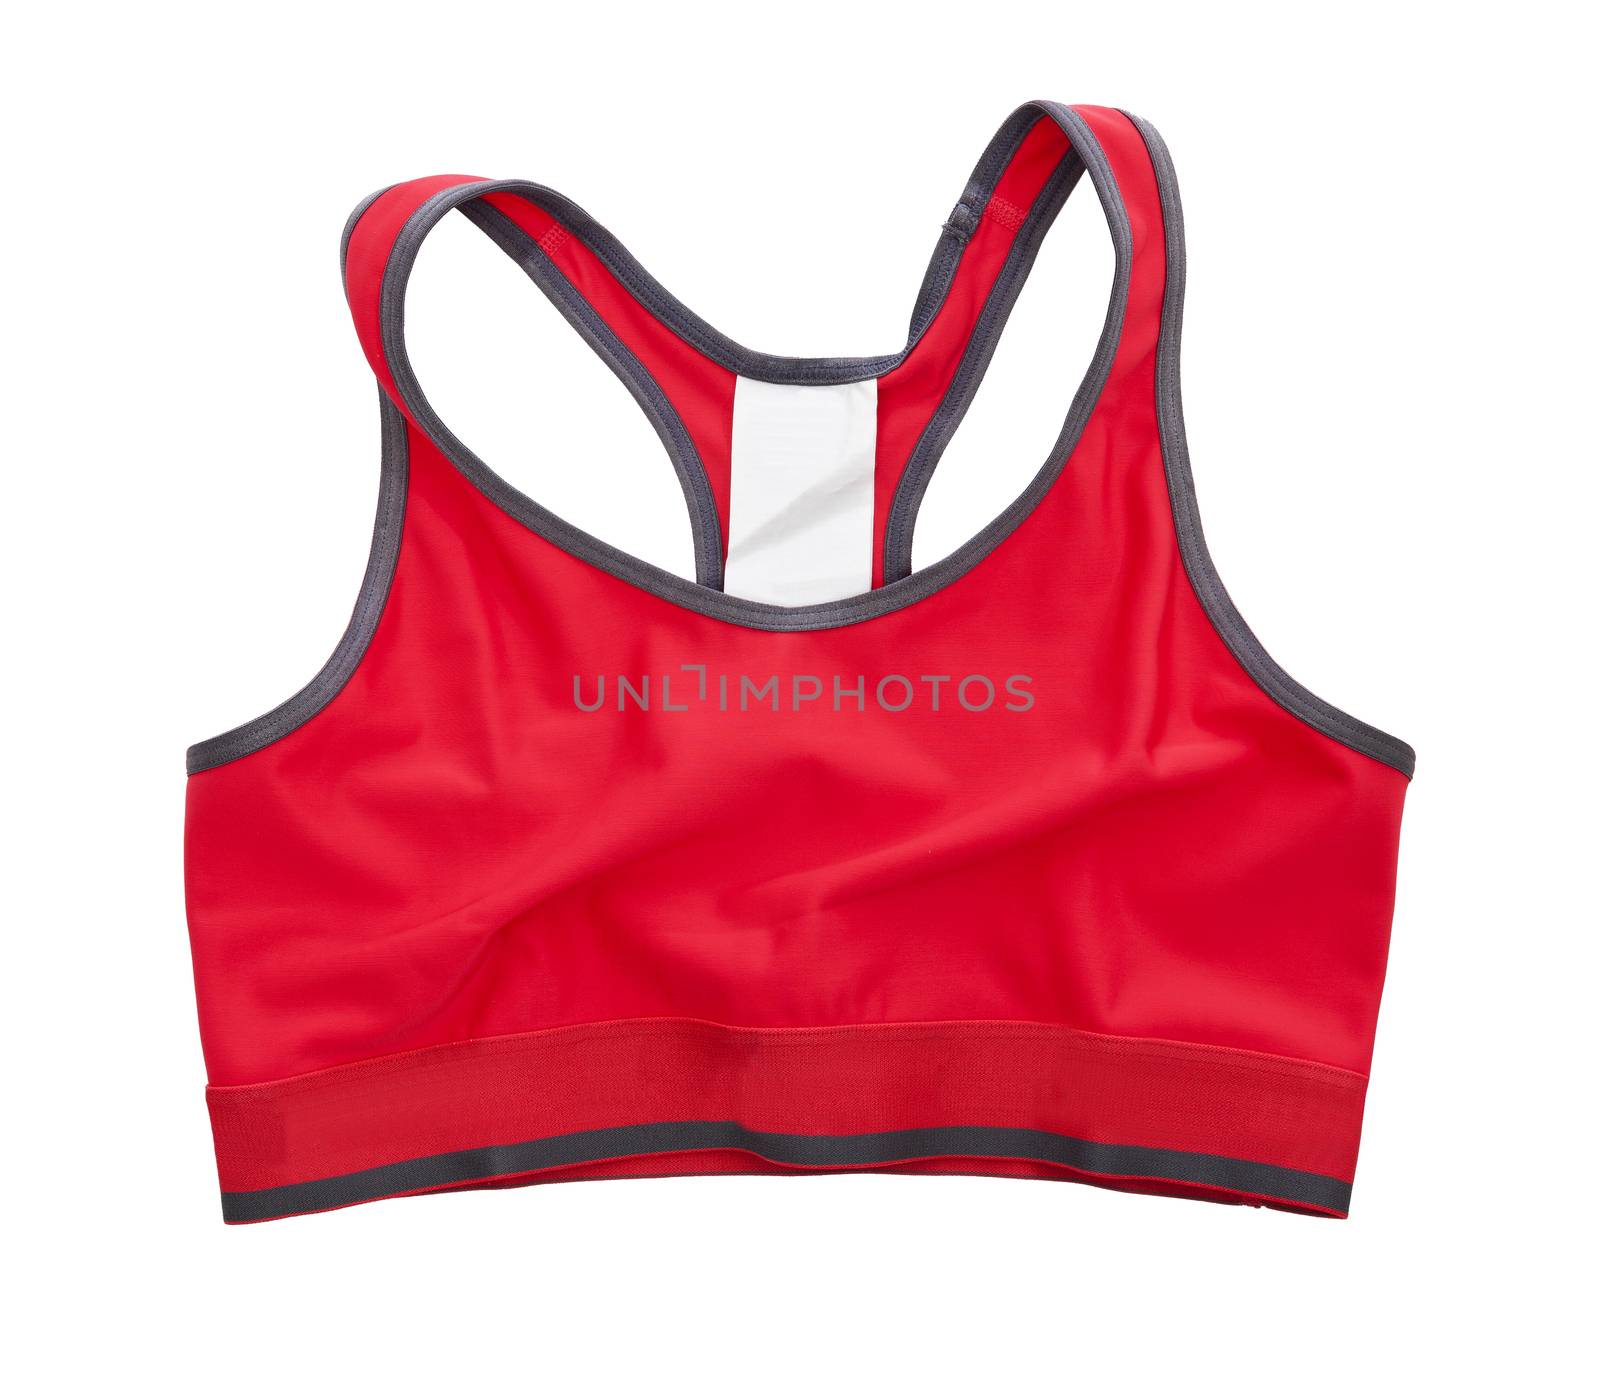 Red Sports Bra isolated on white background